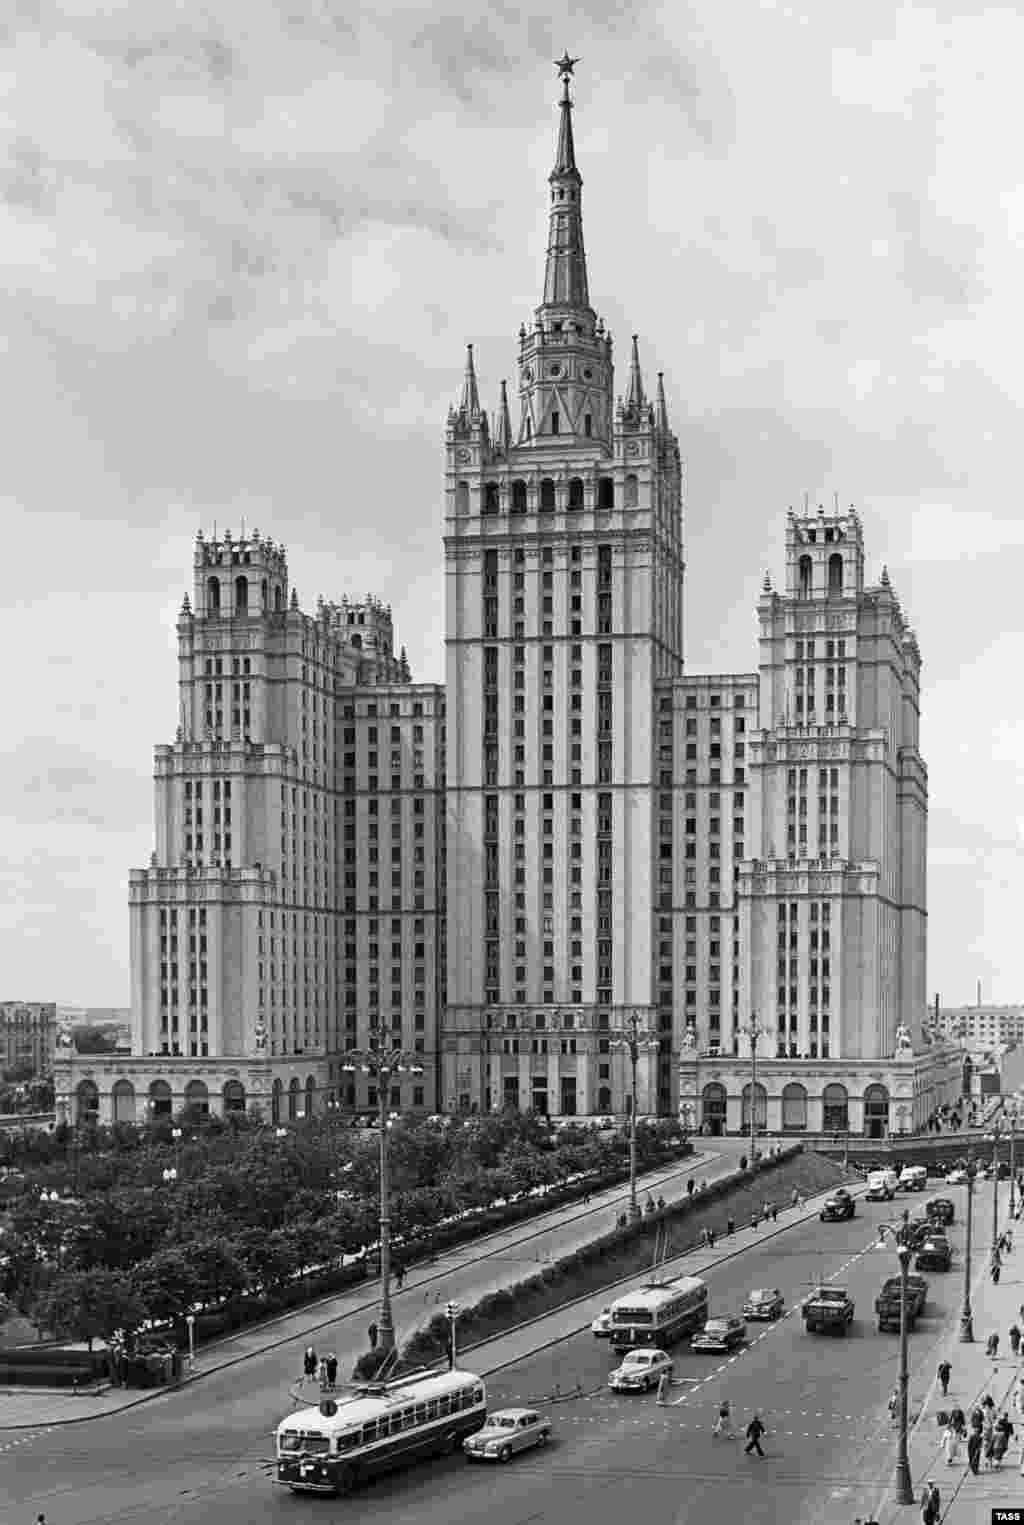 Kudrinskaya Square Building, in 1958. The blocky tower was once the home of test pilots, rocket scientists, and other stars of the Soviet world. As well as an air-conditioning system for when the weather turned warm, the residential building featured a bomb shelter in case the Cold War turned hot.